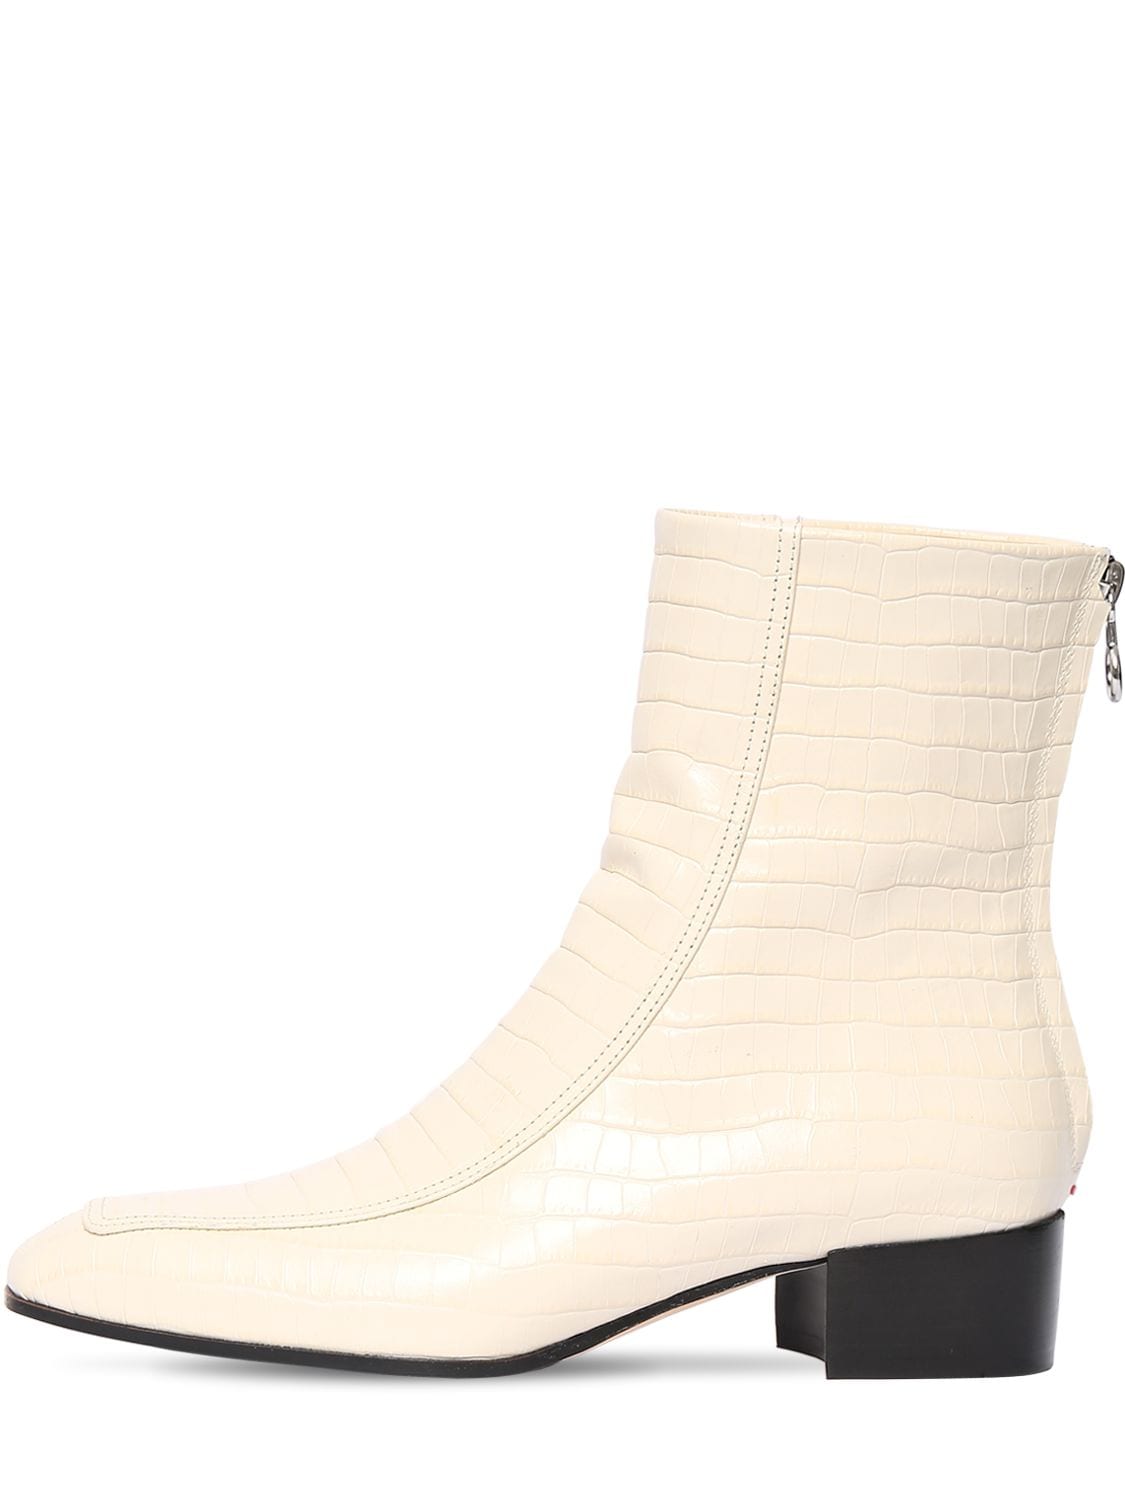 Aeyde 35mm Amelia Croc Embossed Leather Boots In Off-white